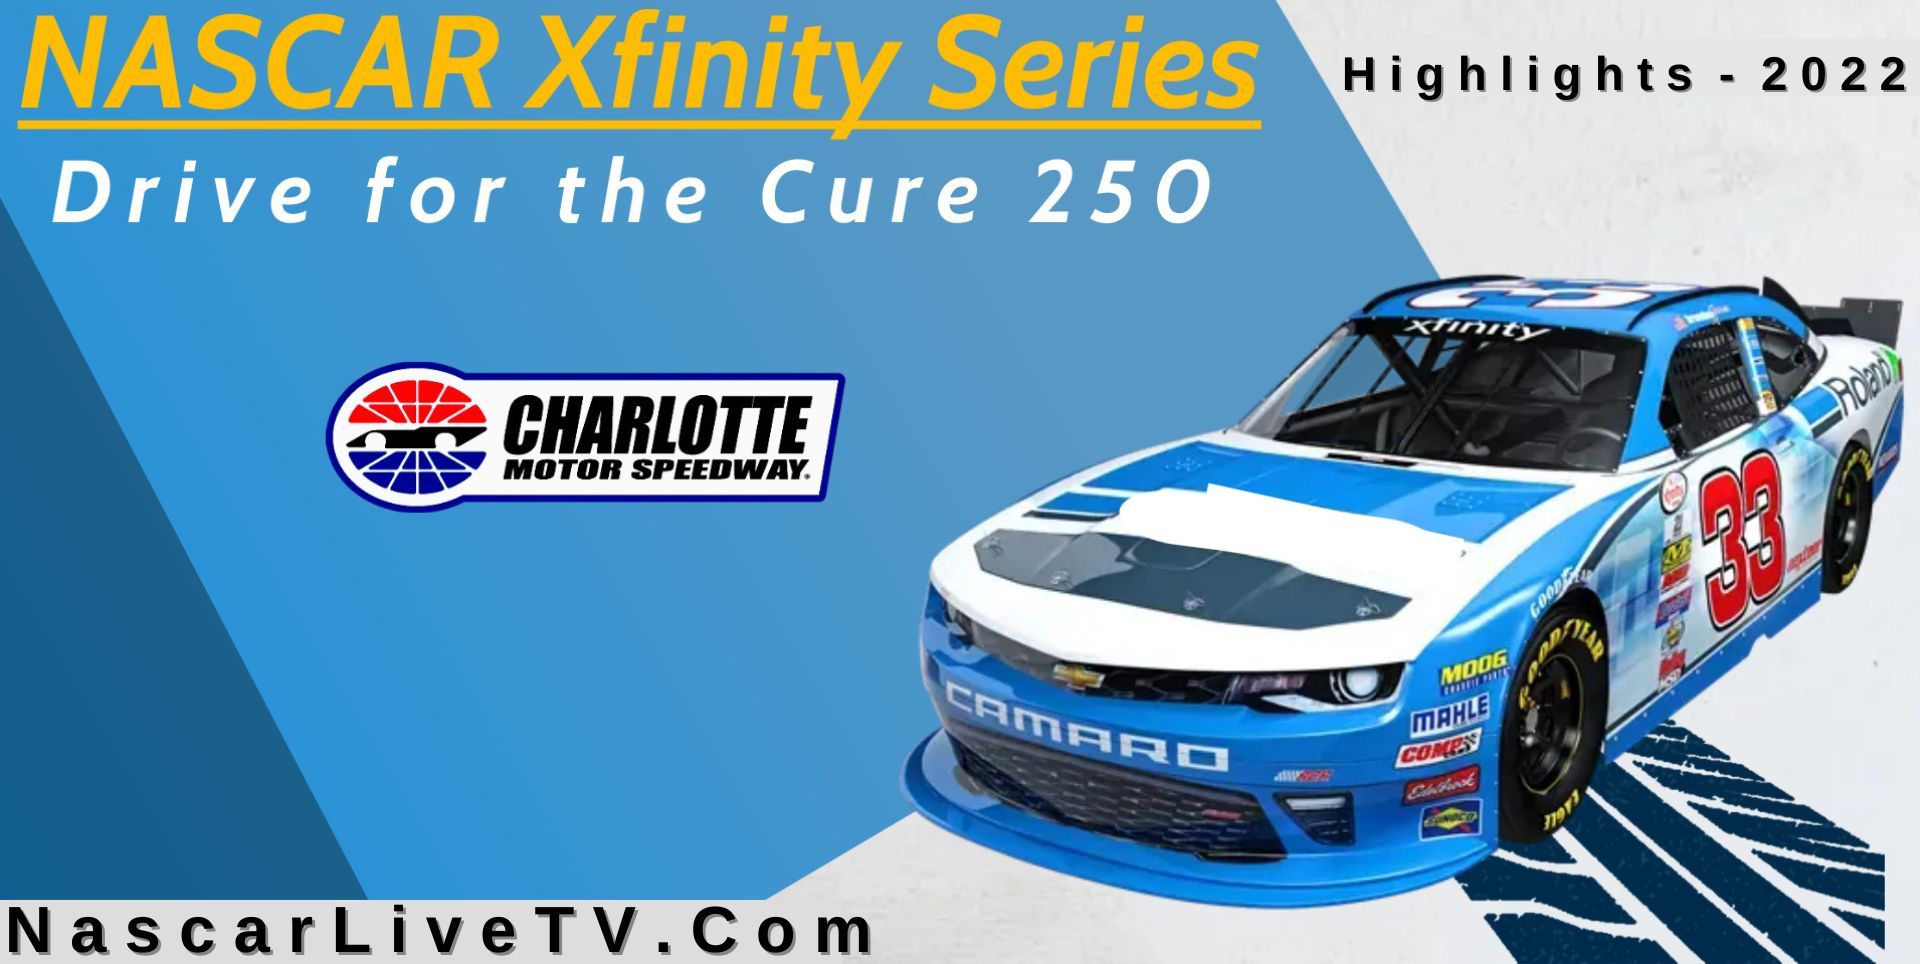 Drive For The Cure 250 Highlights NASCAR Xfinity Series 2022